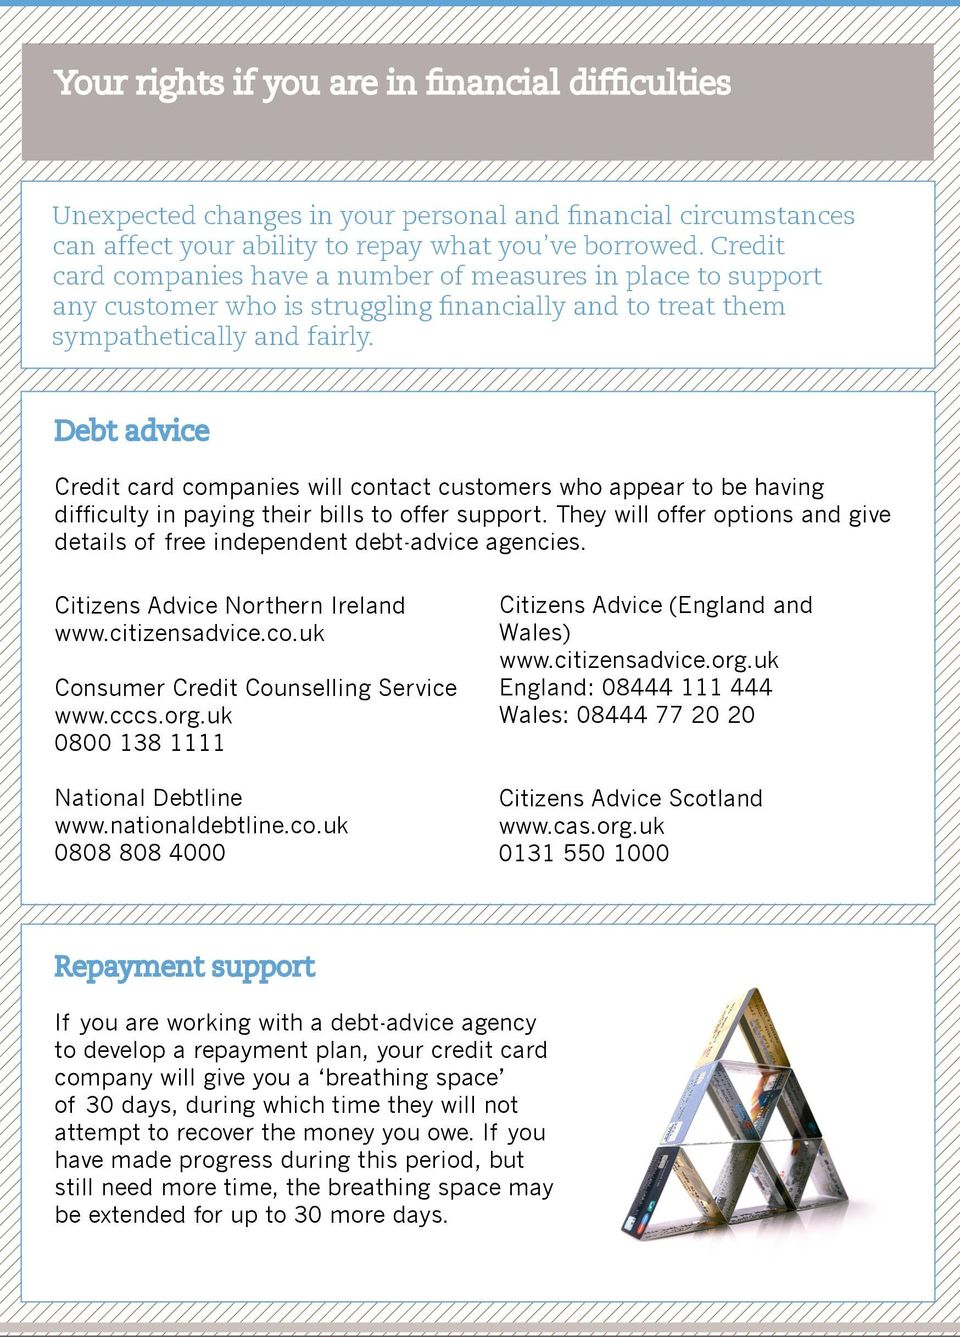 Debt advice Credit card companies will contact customers who appear to be having difficulty in paying their bills to offer support.